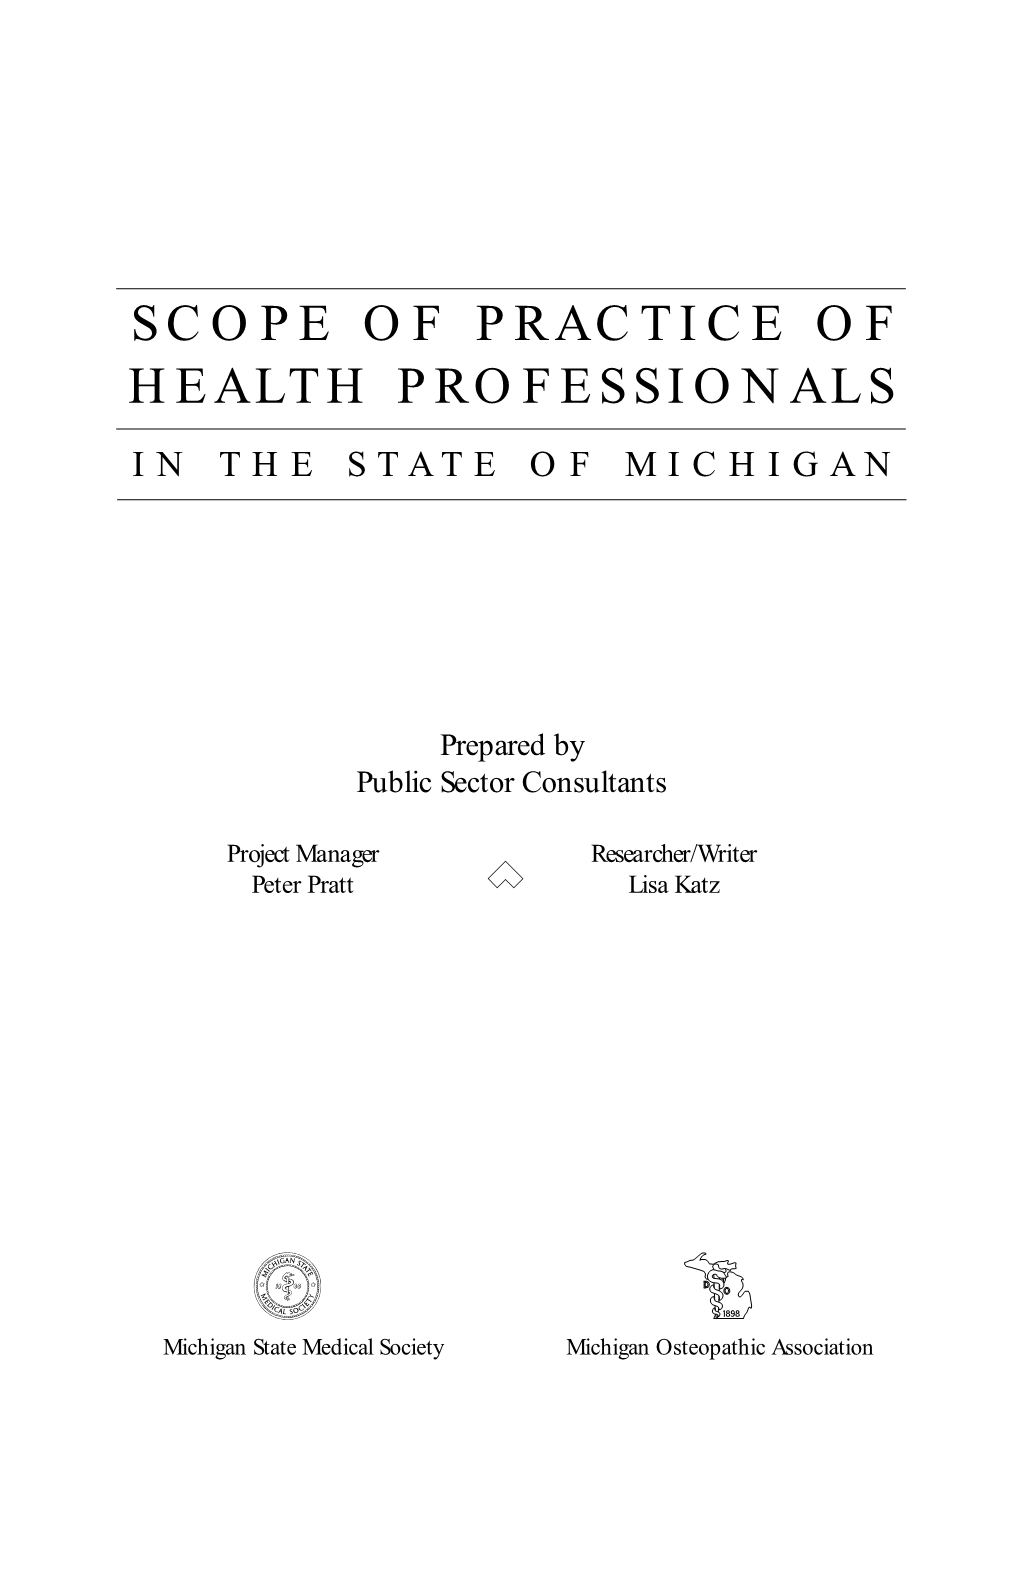 Scope of Practice of Health Professionals in the State of Michigan